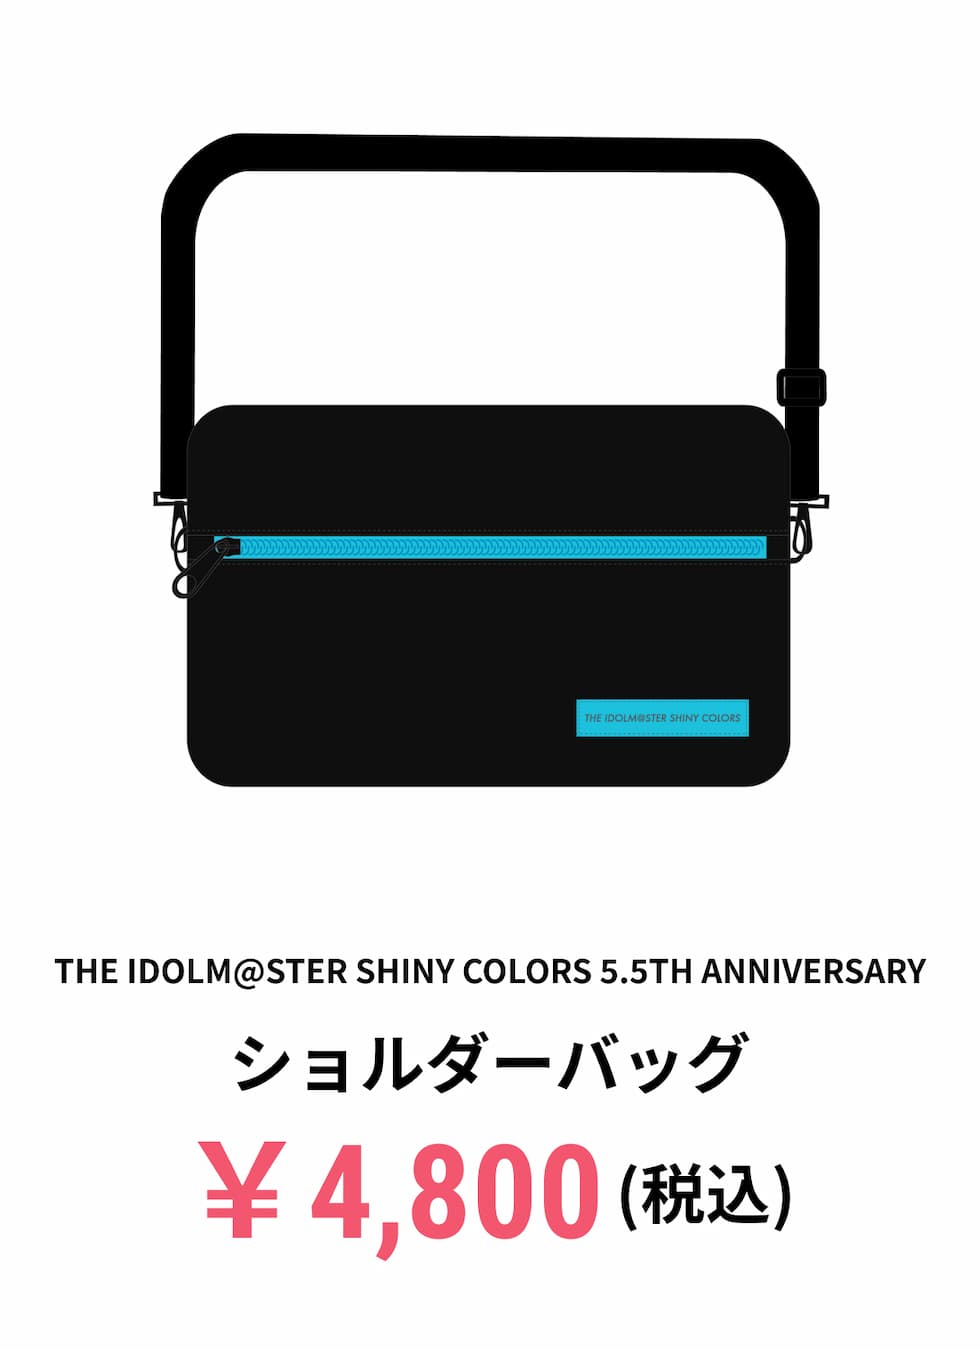 THE IDOLM@STER SHINY COLORS 5.5th Anniversary　ショルダーバッグ